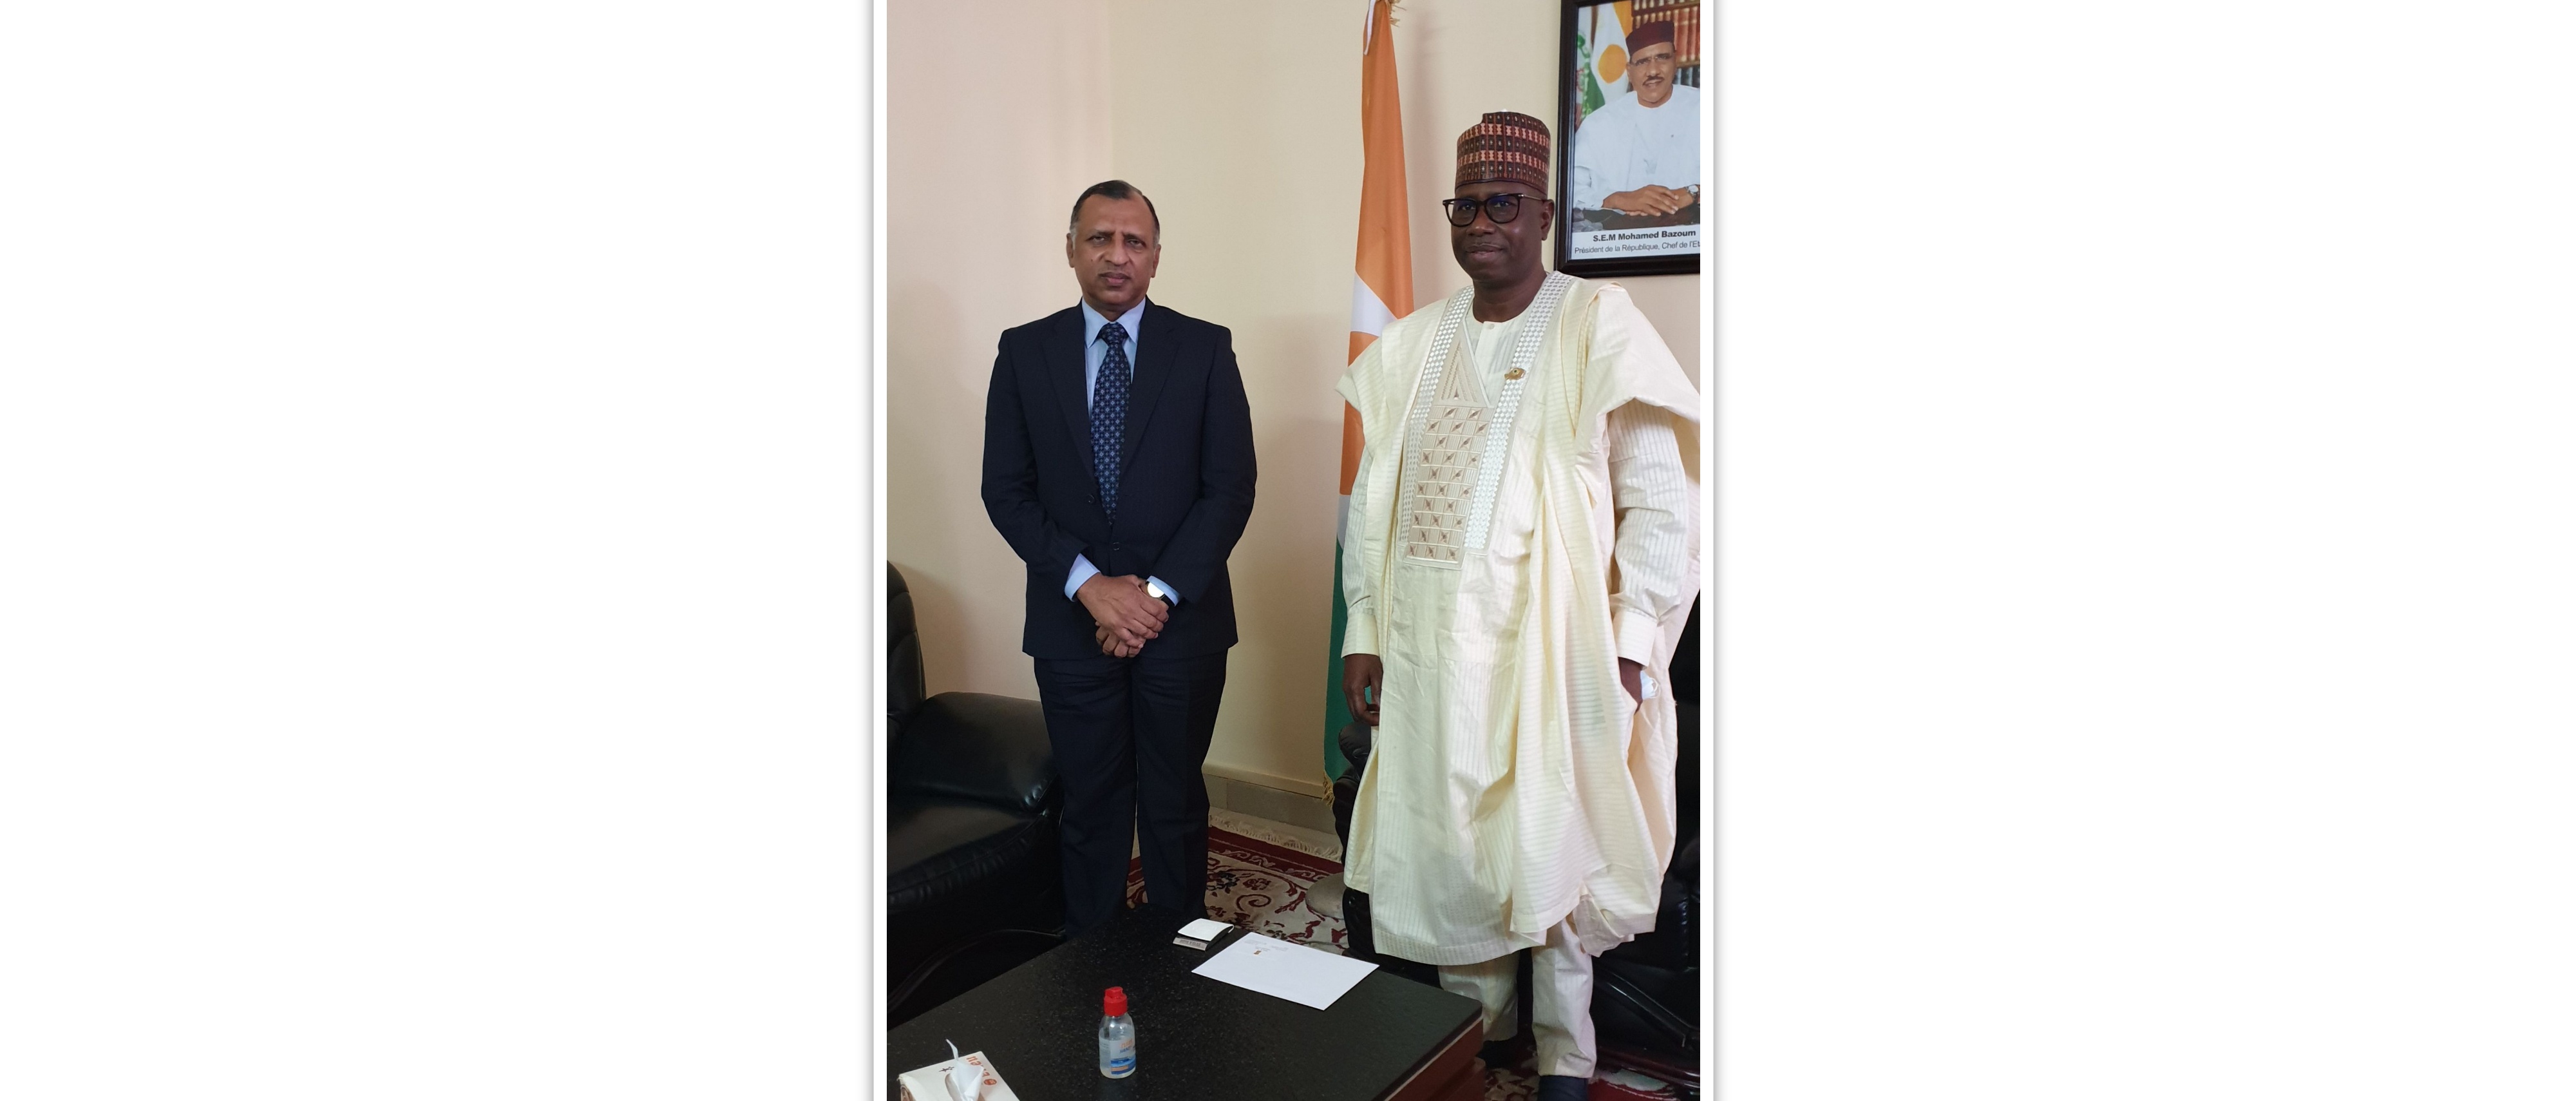  Ambassador Nair with the President of the National Economic, Social and Cultural Council of Niger, Mr.Malam Ligari Mairou